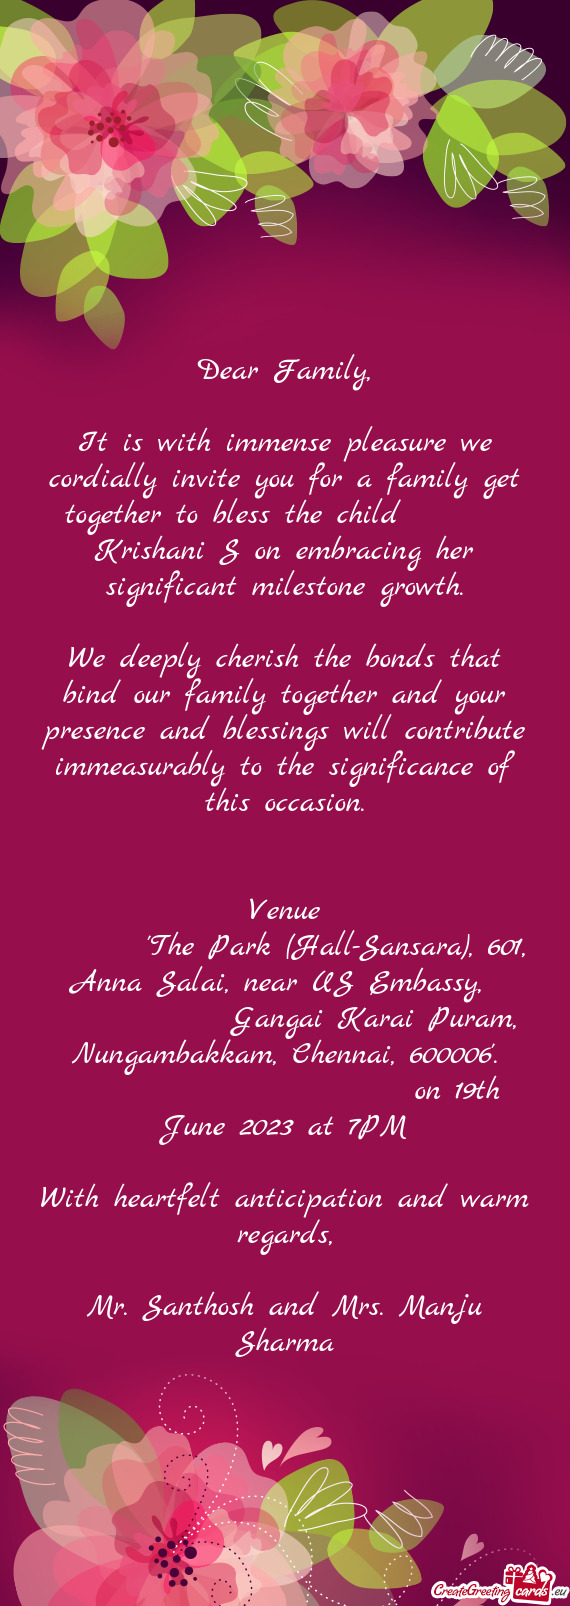 It is with immense pleasure we cordially invite you for a family get together to bless the child